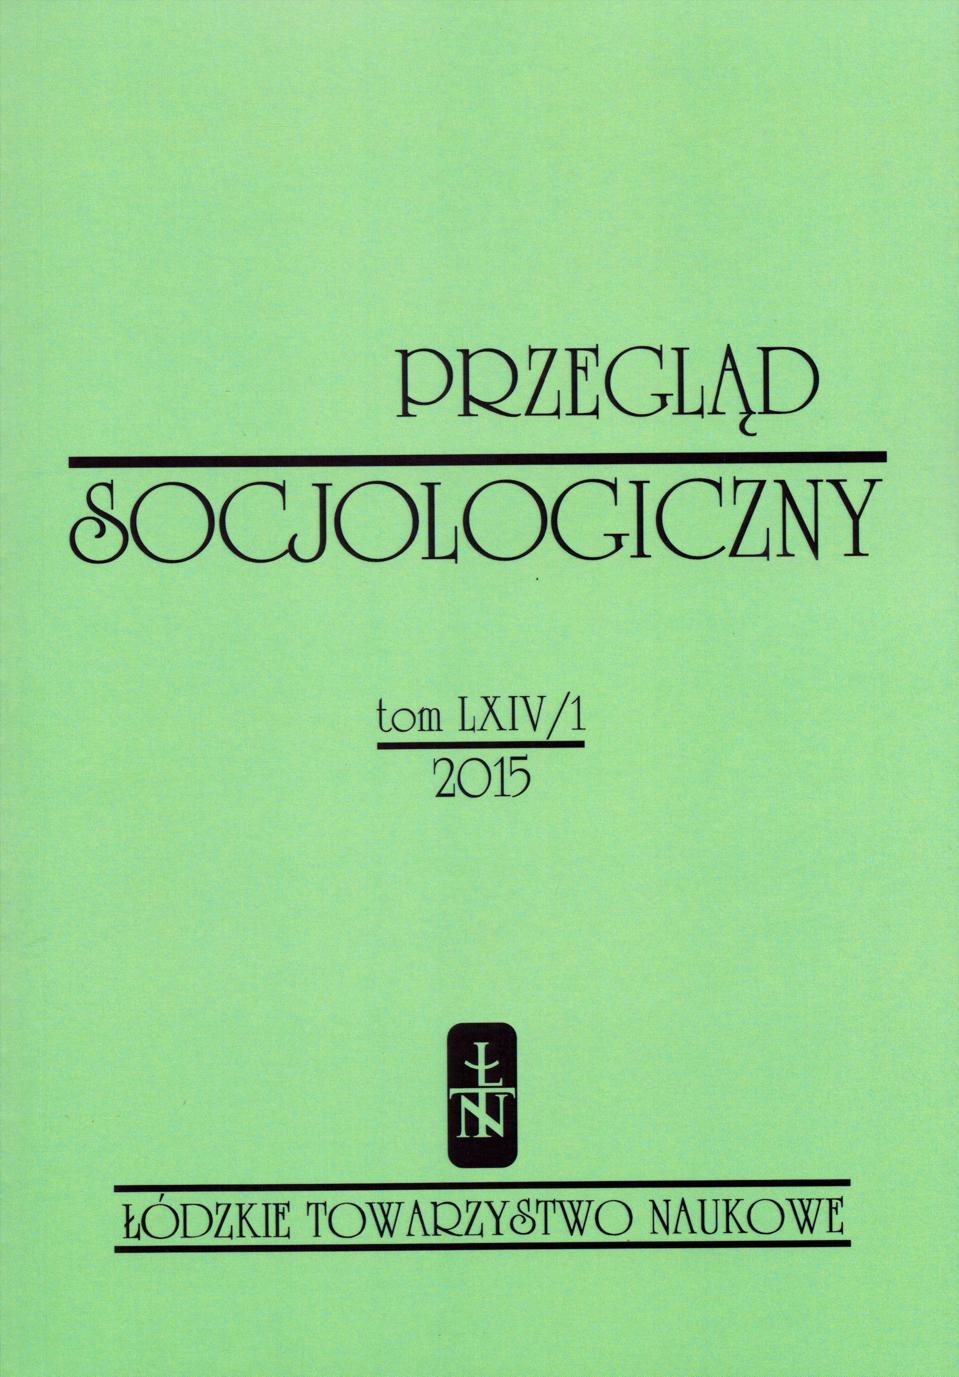 Sexuality education in Polish schools Cover Image